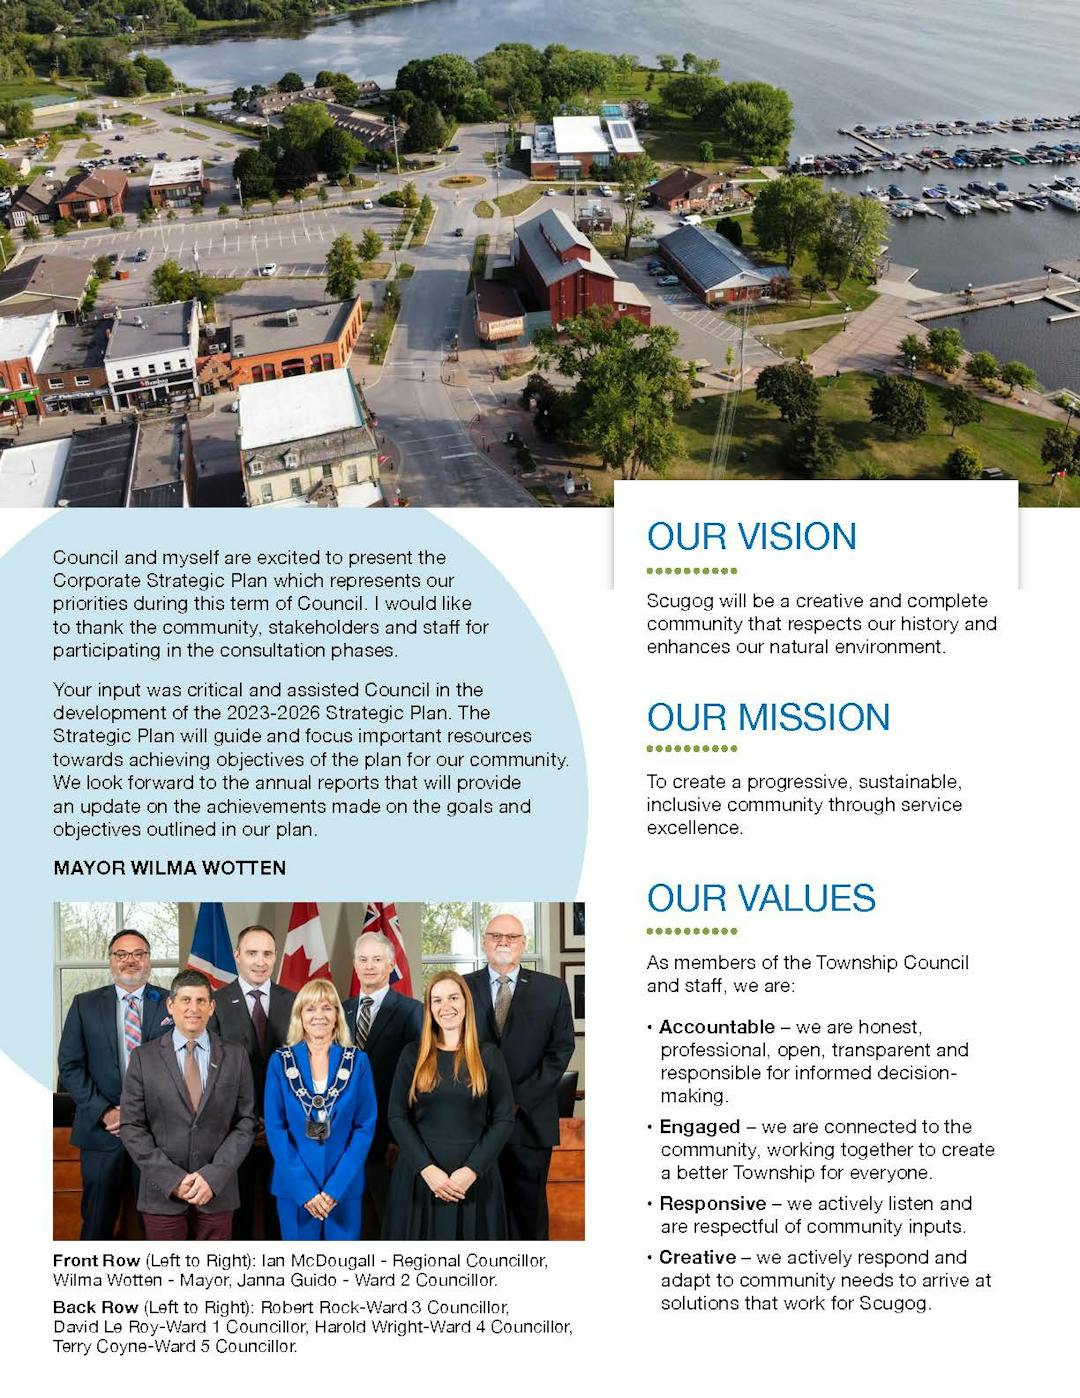 Strategic Plan  Council Image with Vision, Mission and Value statements